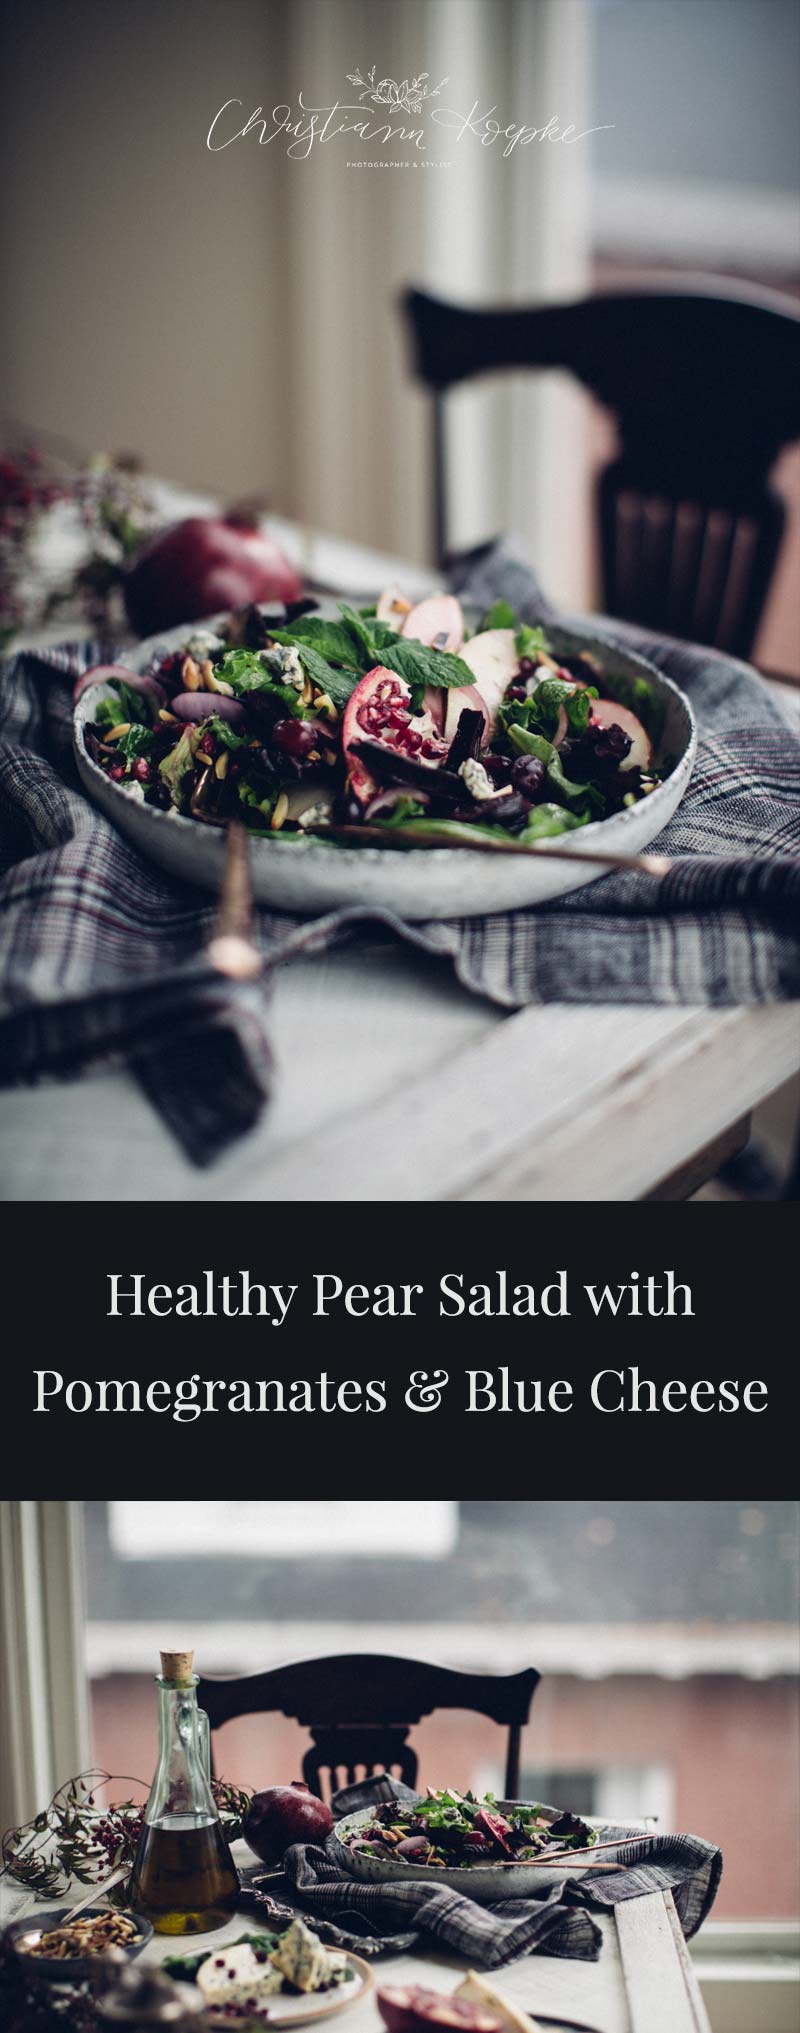 Healthy Pear Salad with Pomegranates and Blue Cheese - Christiann Koepke